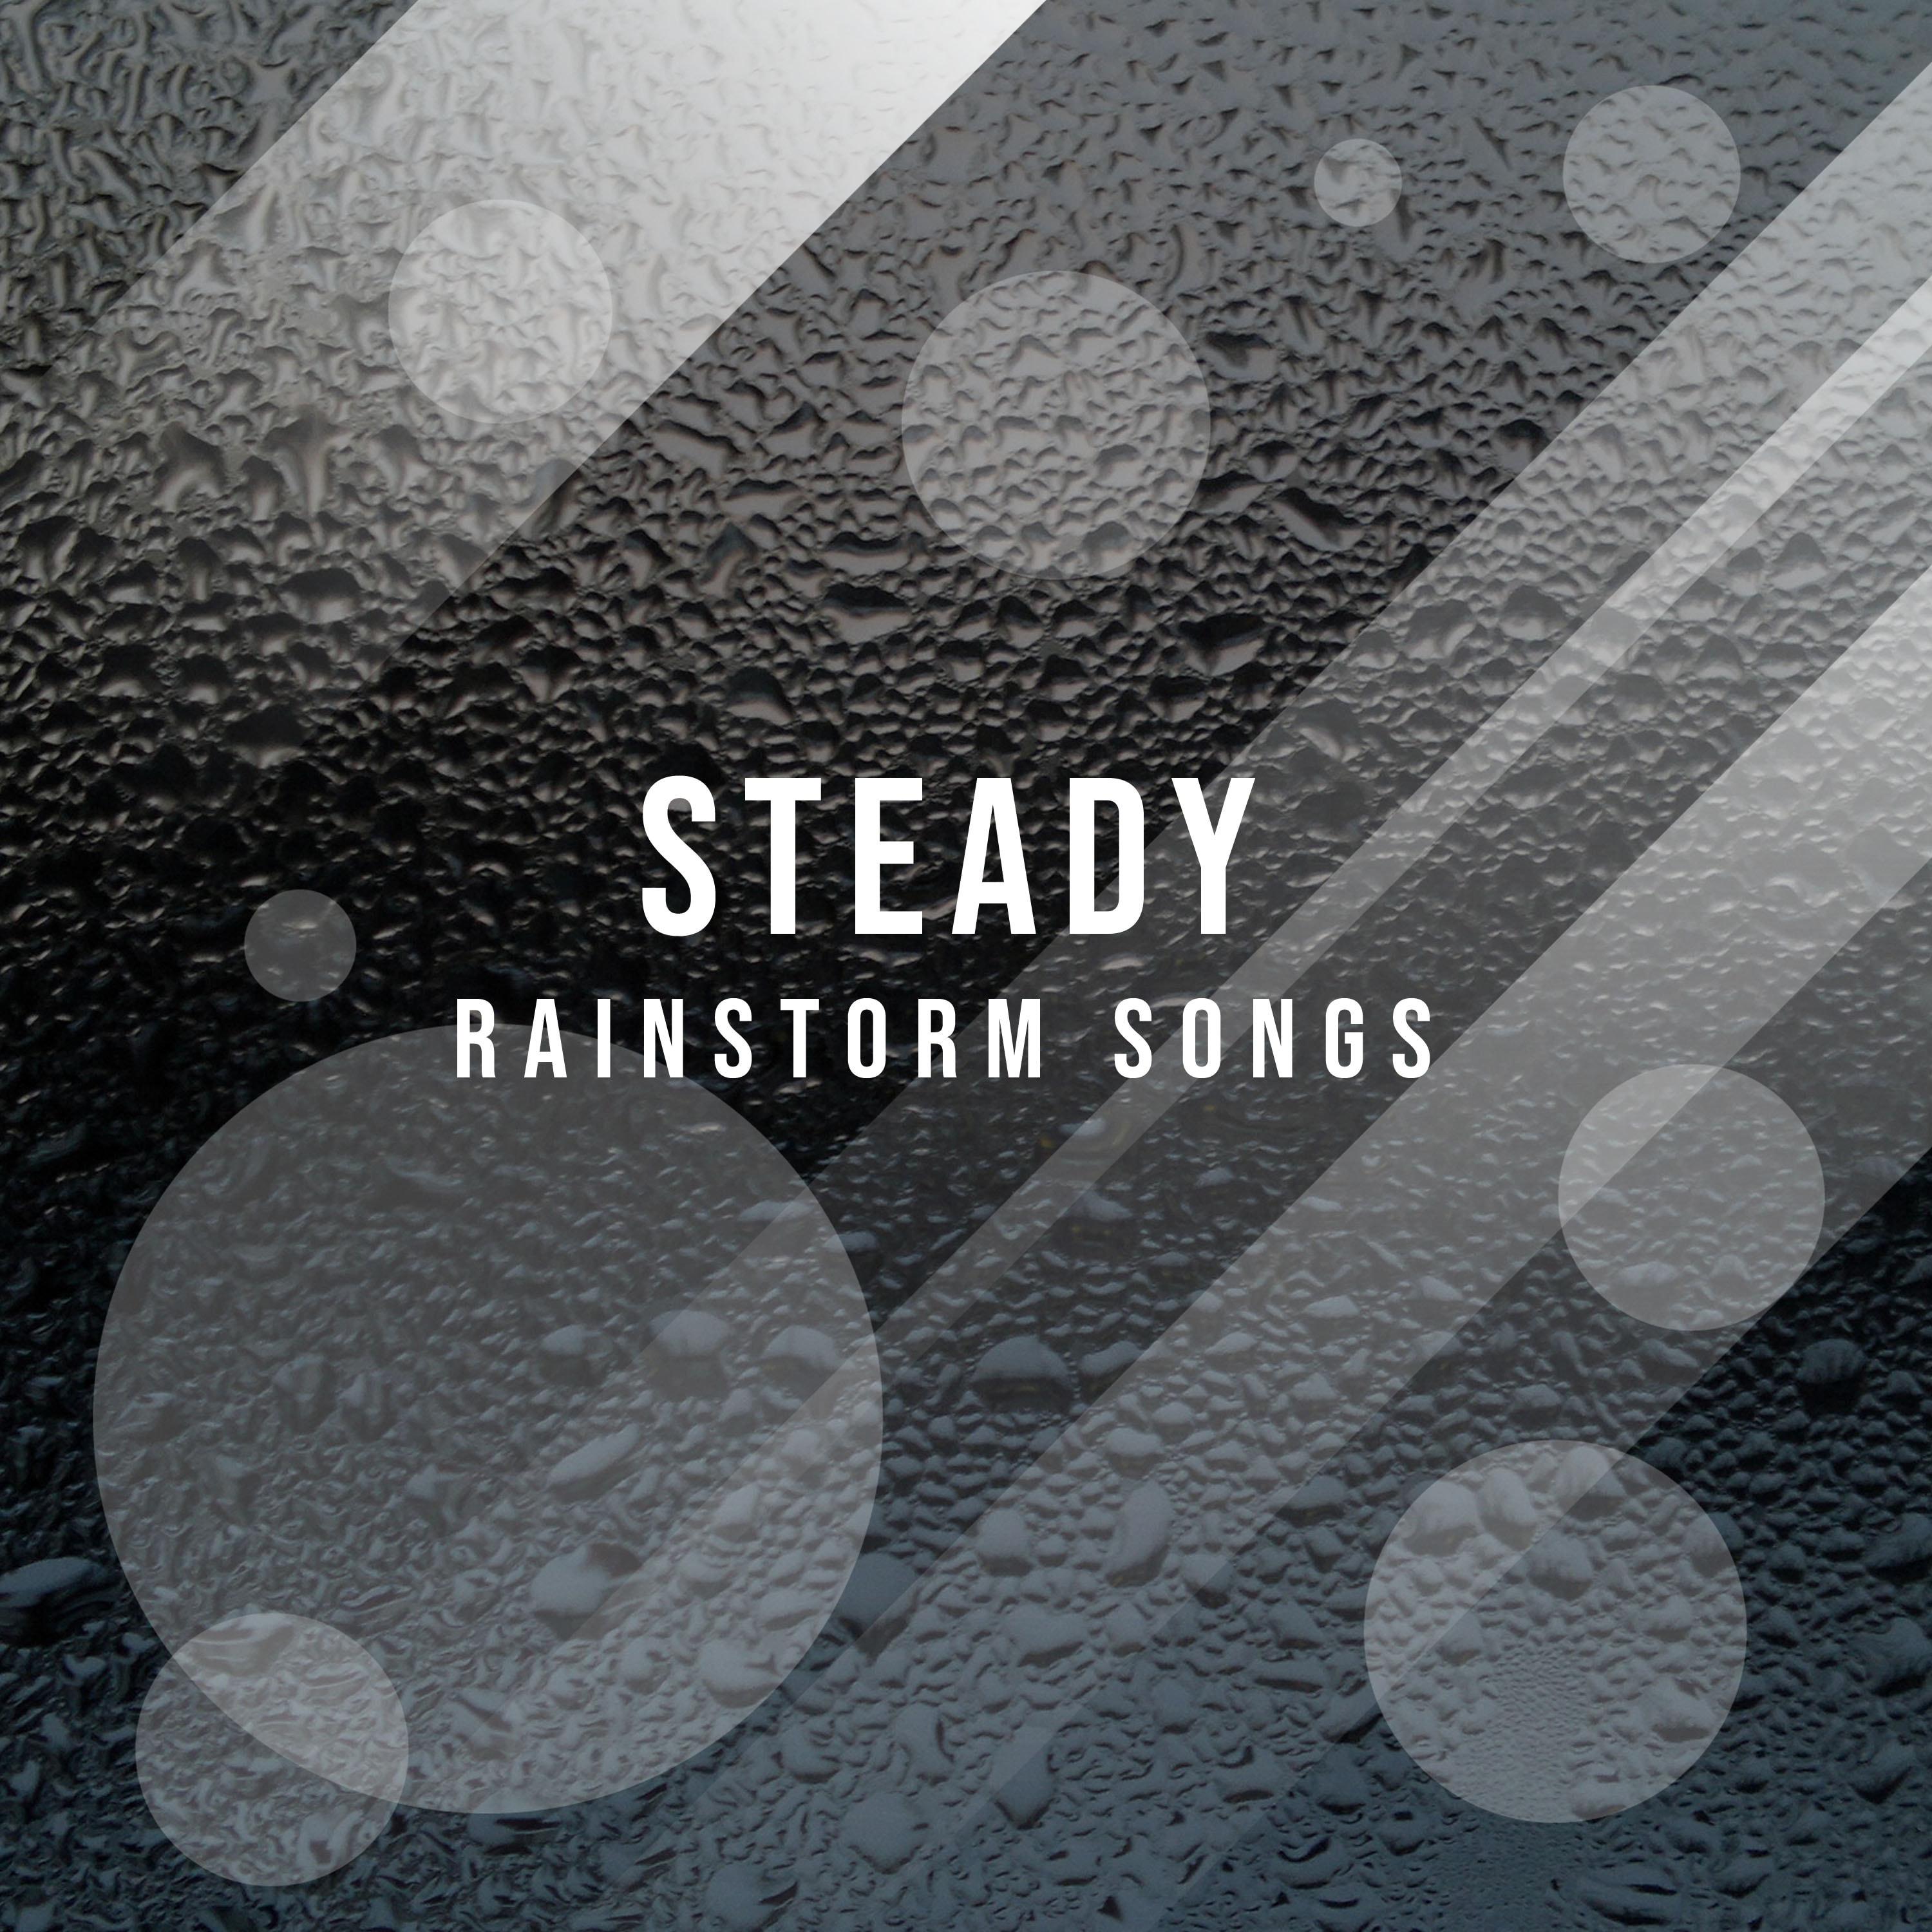 #1 Hour of Steady Rainstorm Songs for Relaxing & Sleep